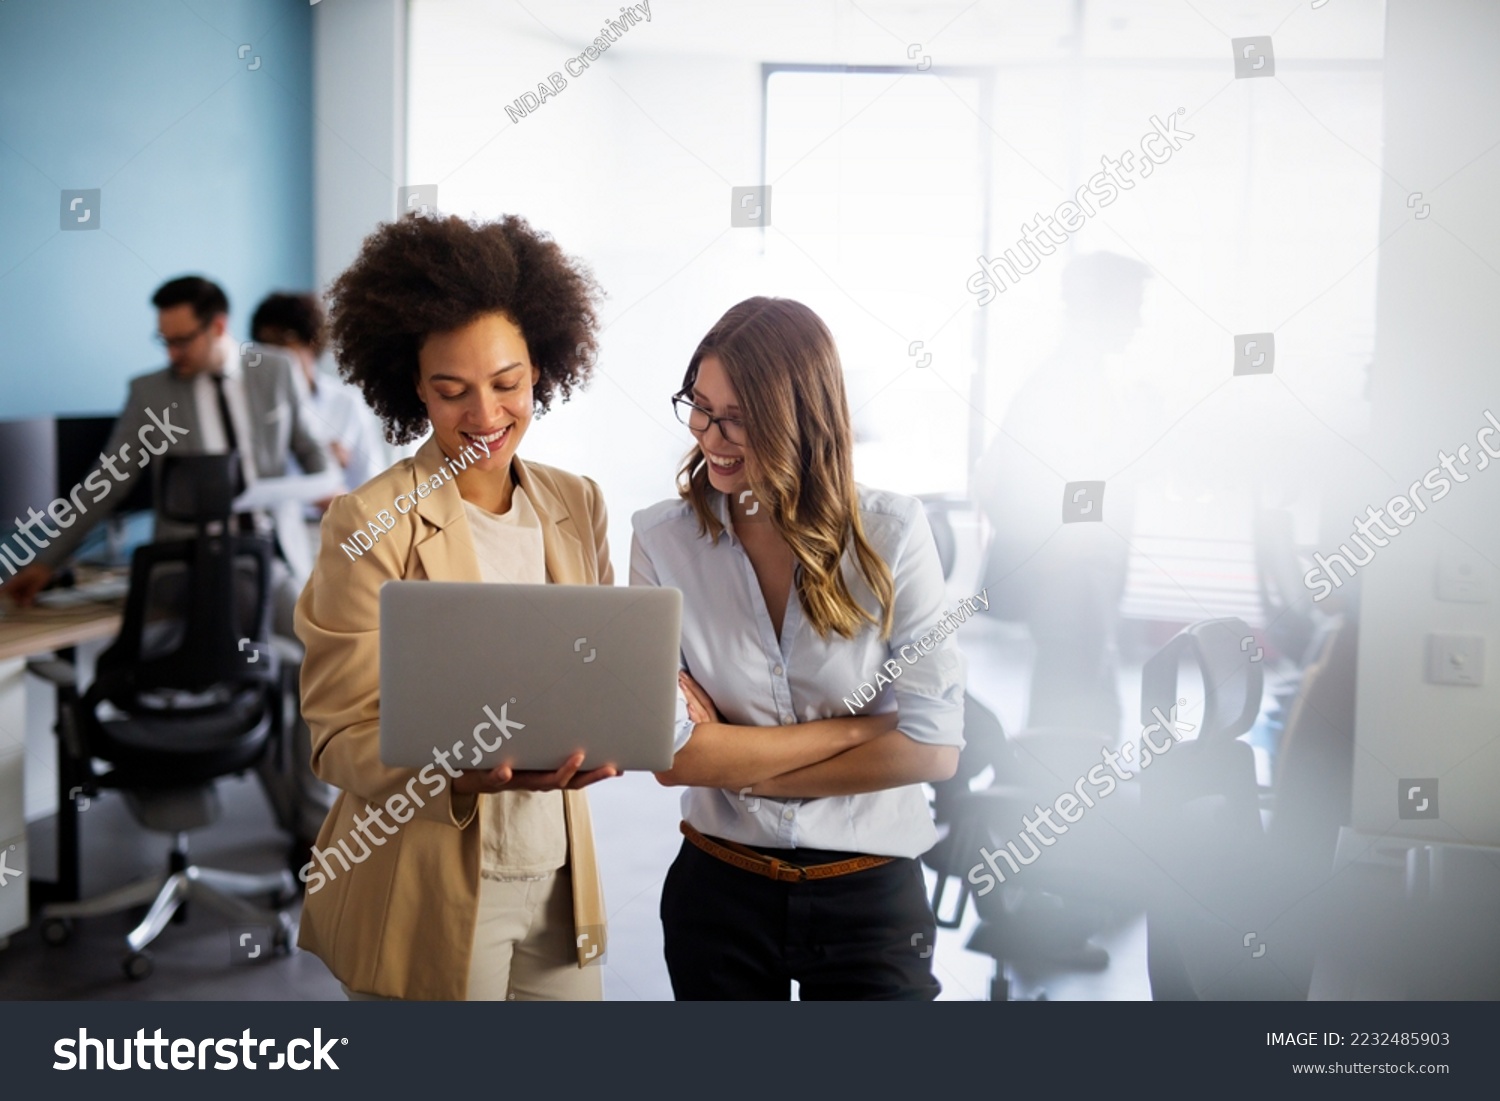 Happy multiethnic smiling business women working together in office #2232485903